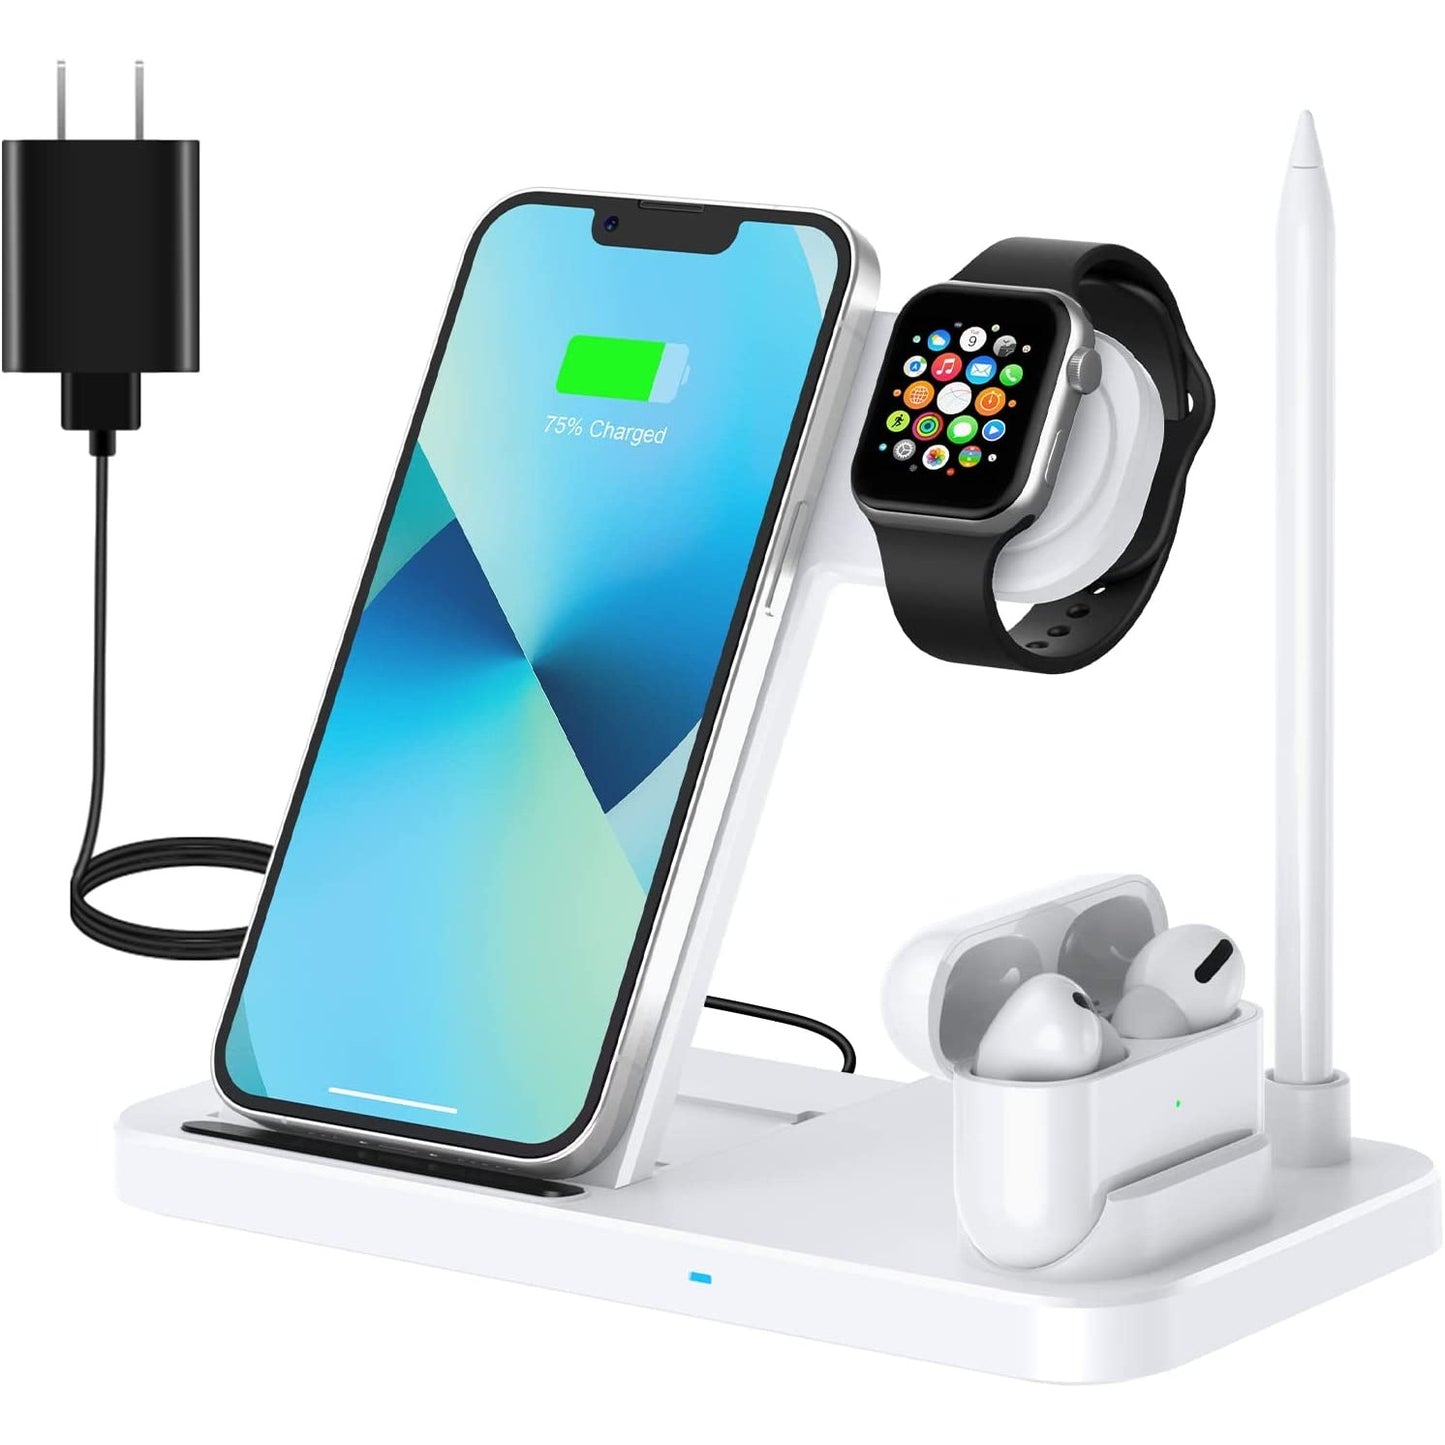 A white colored wireless charging station for Apple devices. On the stand is an iPhone, Apple watch, Apple pencil and AirPods. 